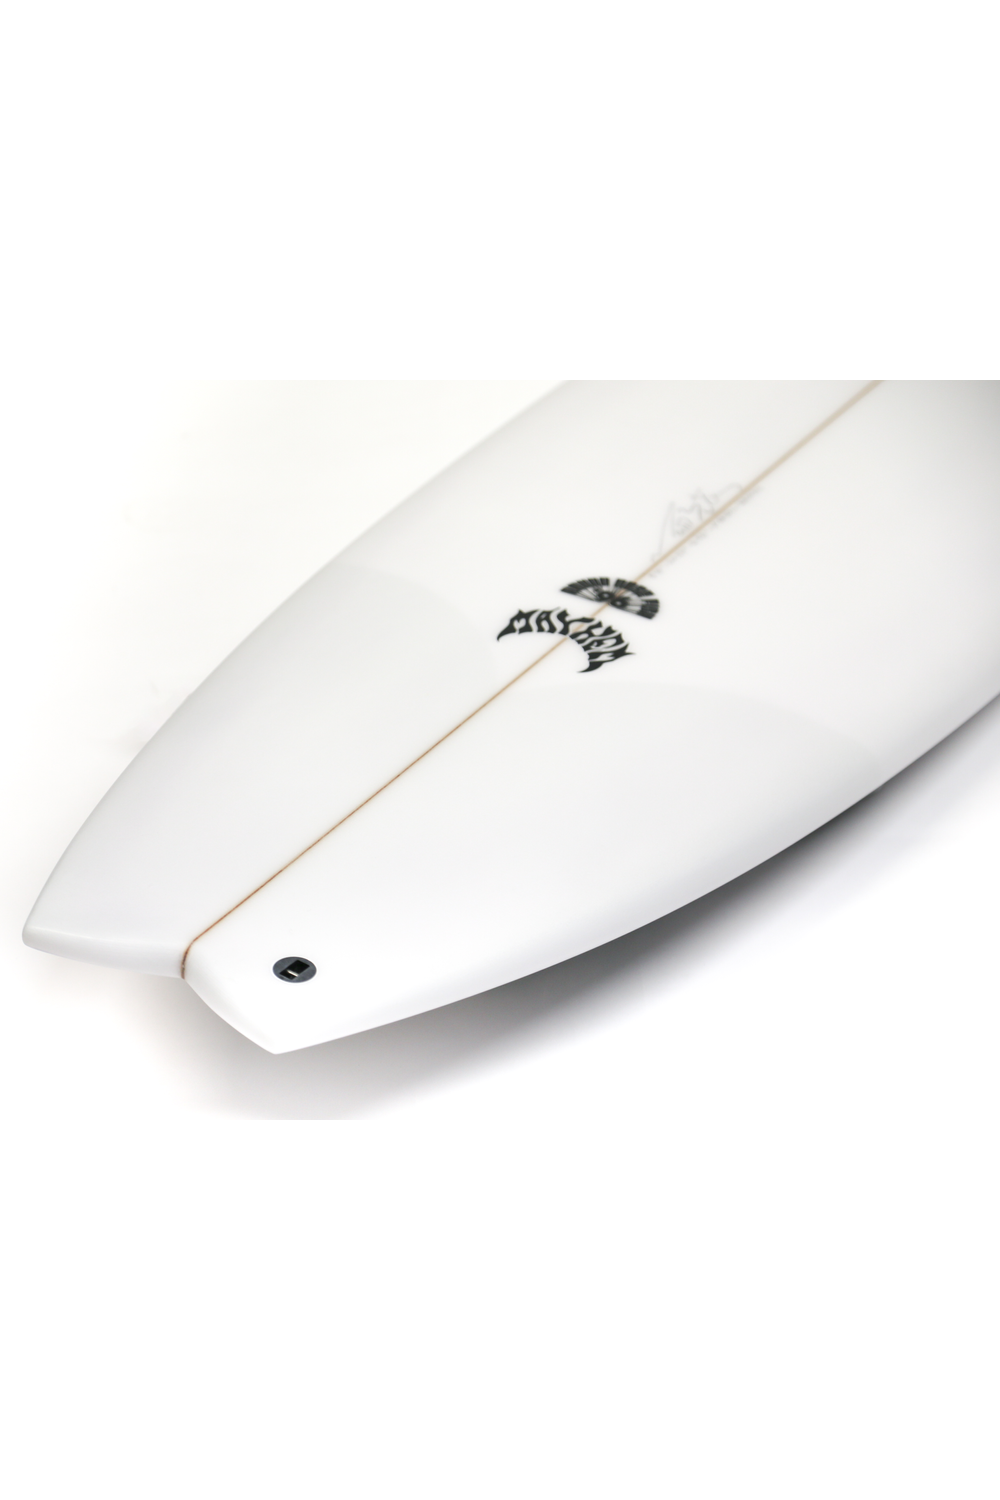 Lost Round Nose Fish 96, 5'8 Surfboard 33.50L PU Futures 3 Fins